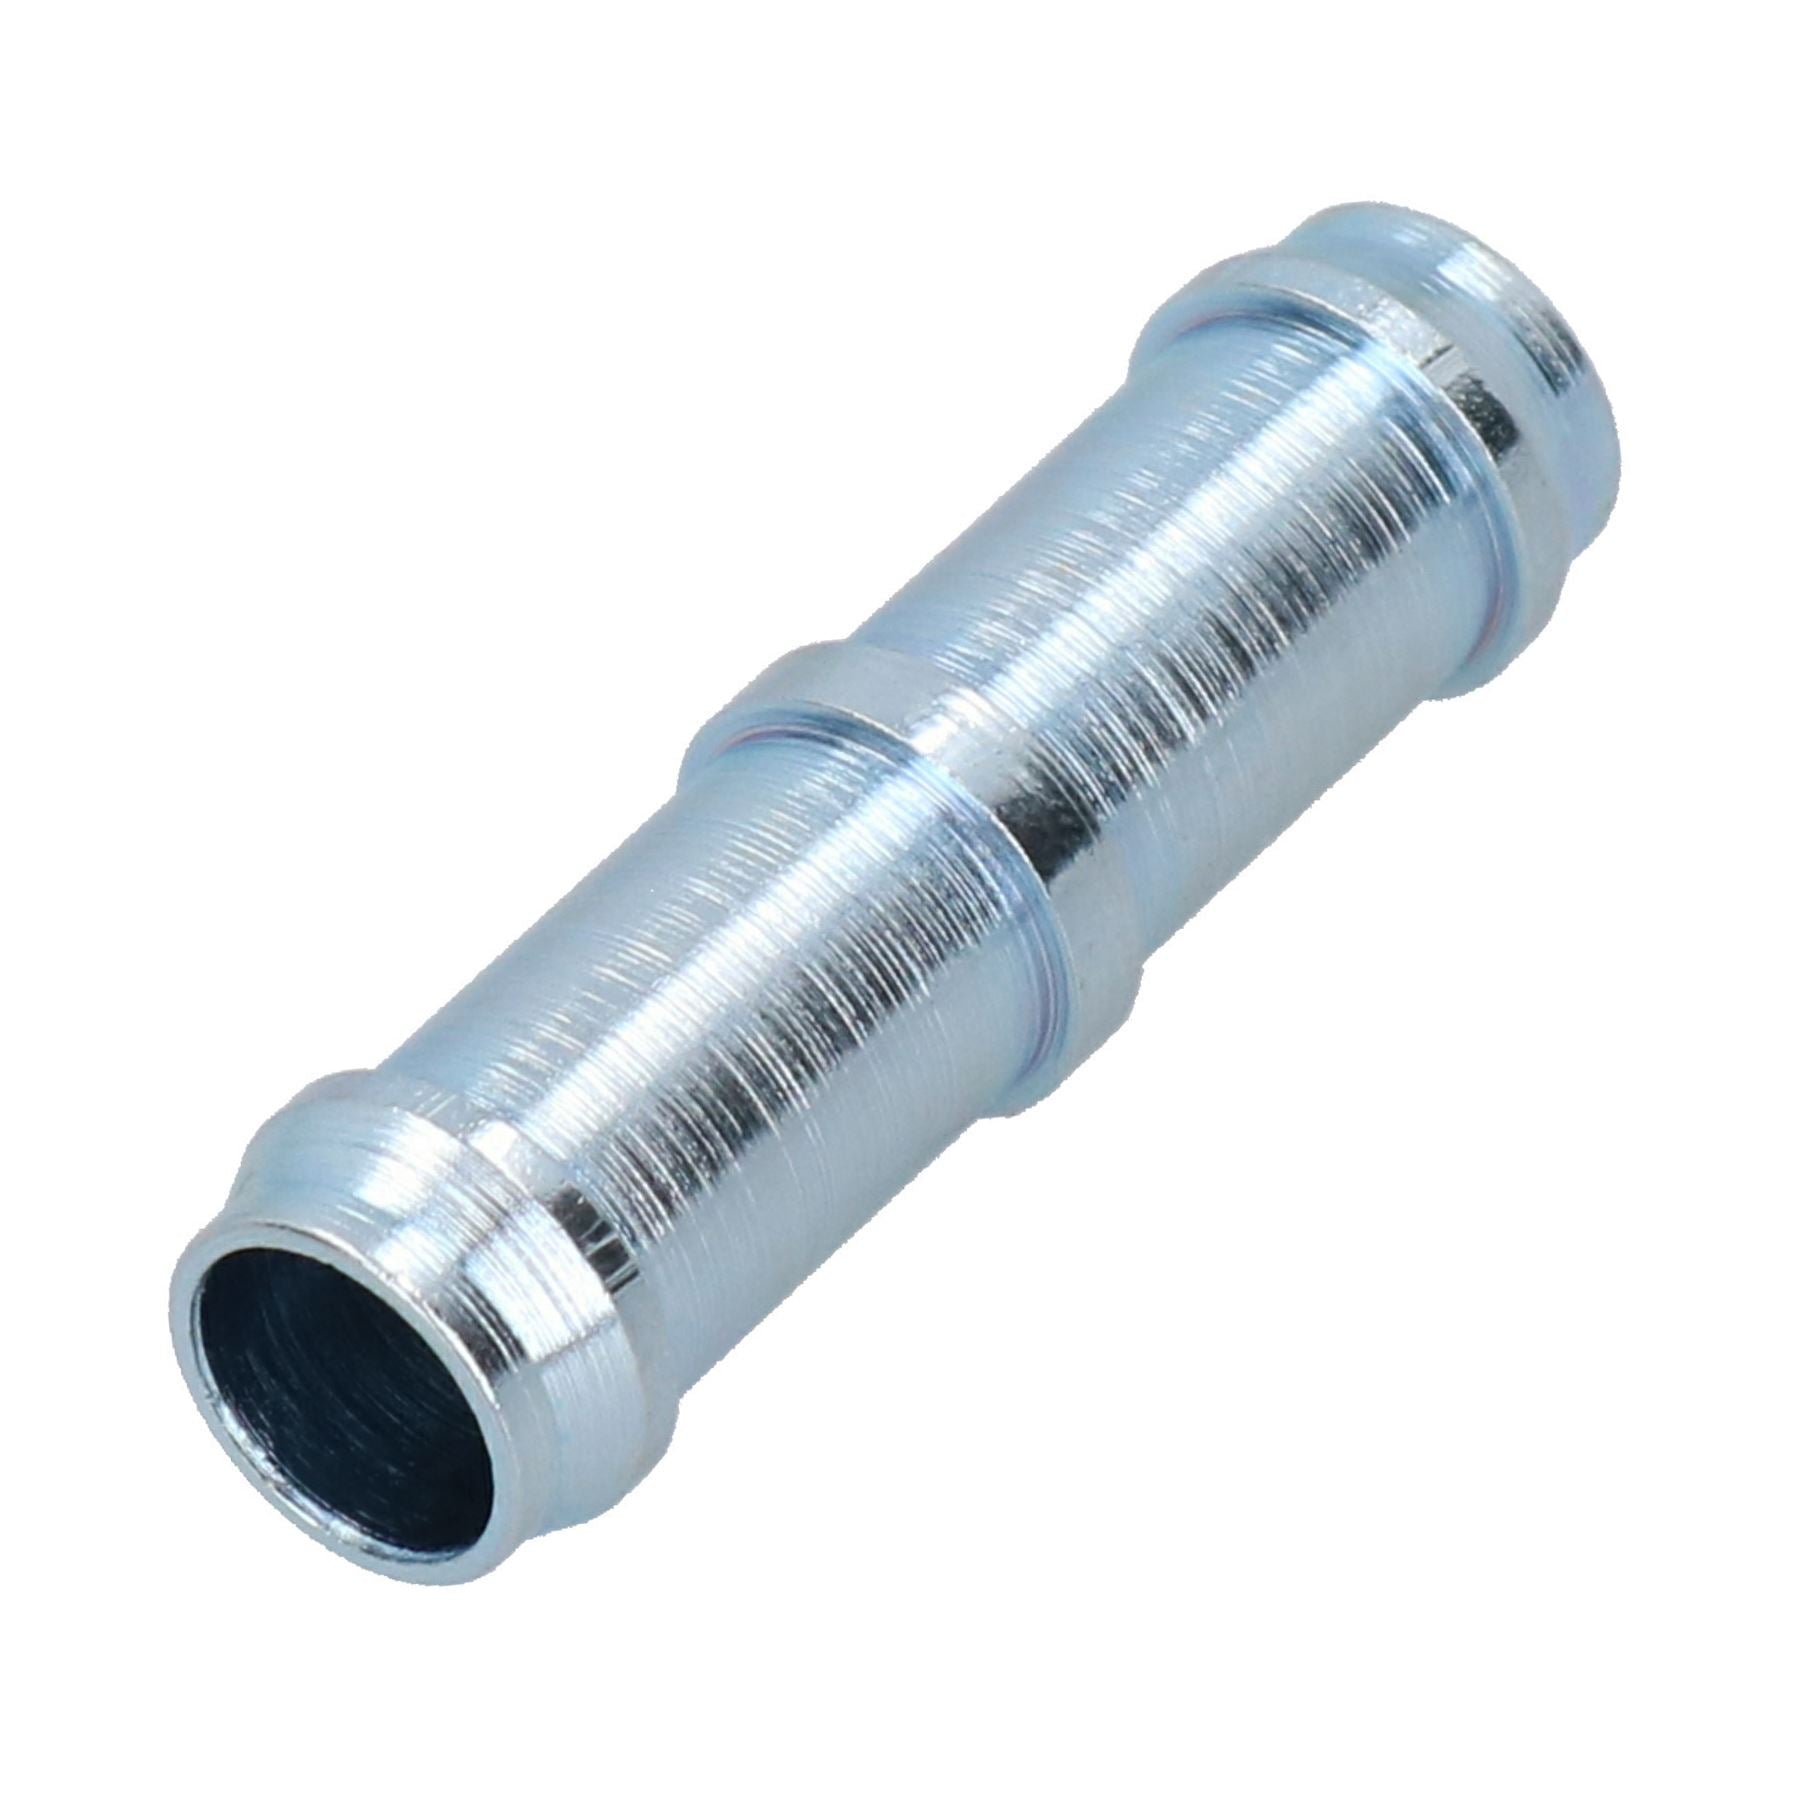 1/2" Steel Hose Joiner / Repair Fitting Double Hose Tail Air Pipe Connector